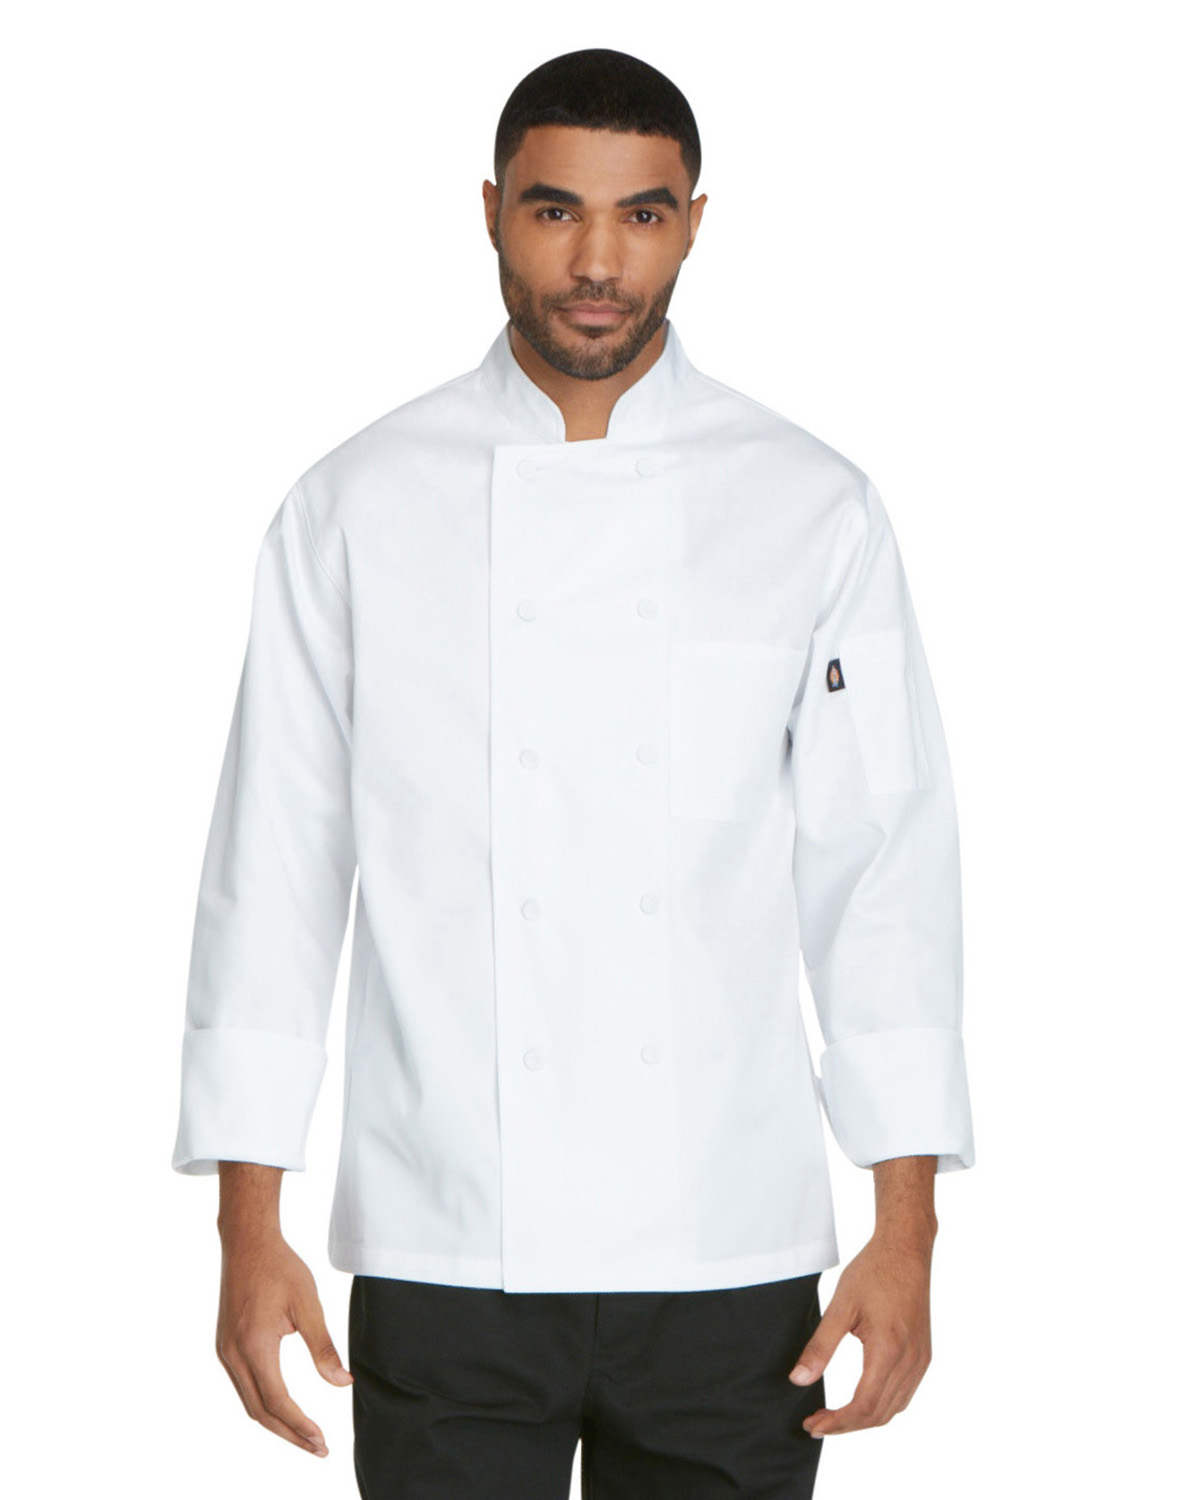 DC44 Dickies Chef Unisex Classic Cloth Covered Button Coat